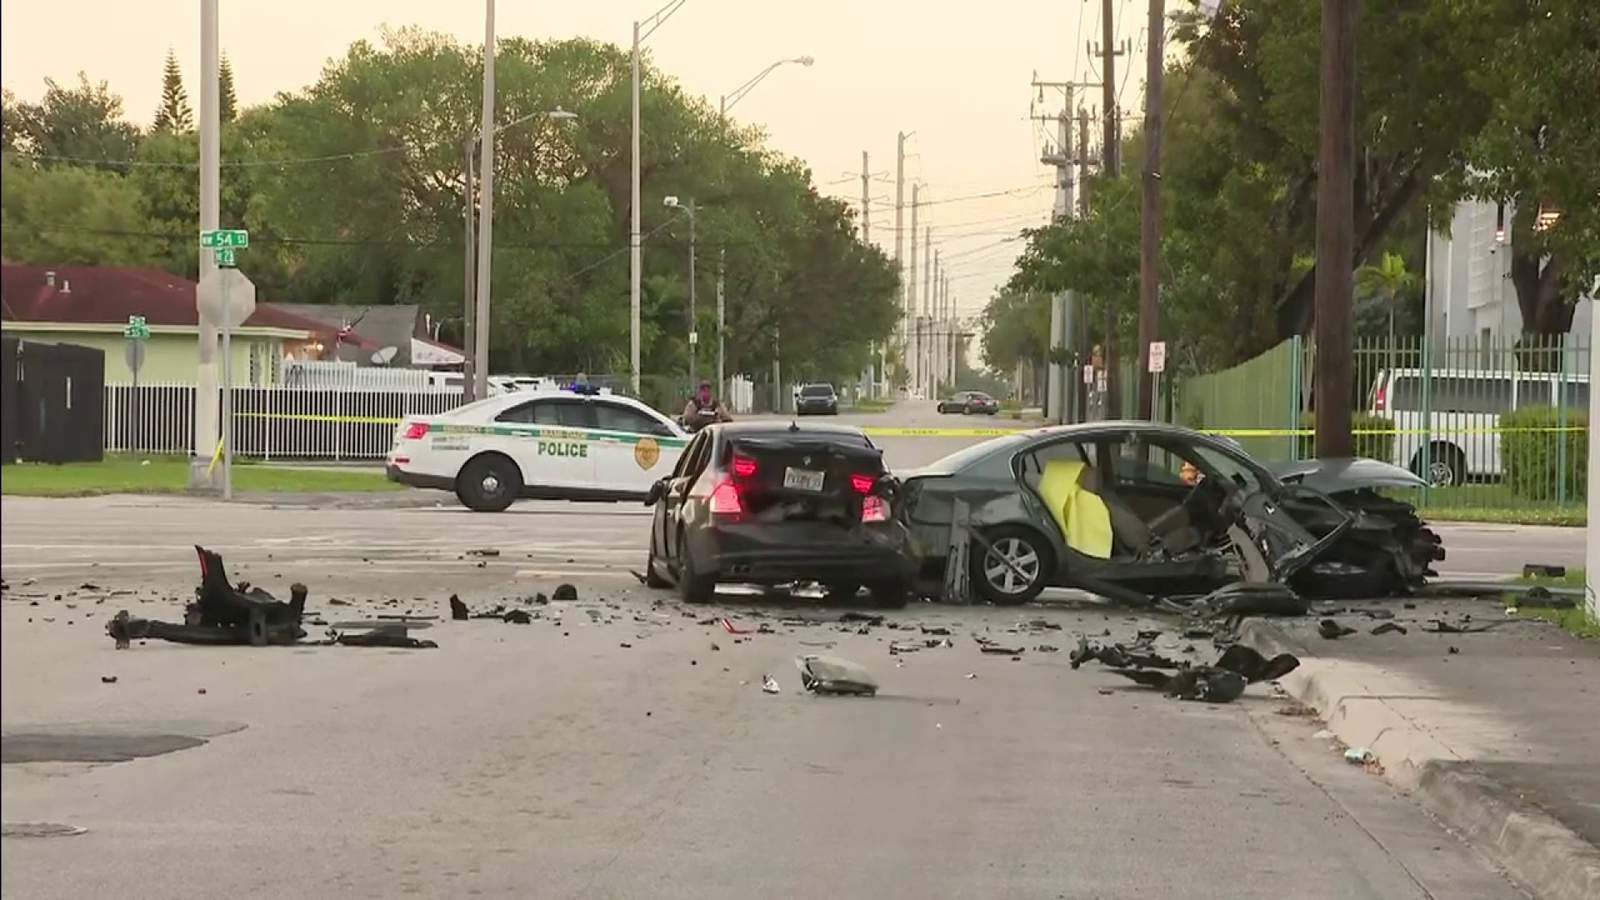 Vehicles badly damaged following early morning crash in Northwest Miami-Dade